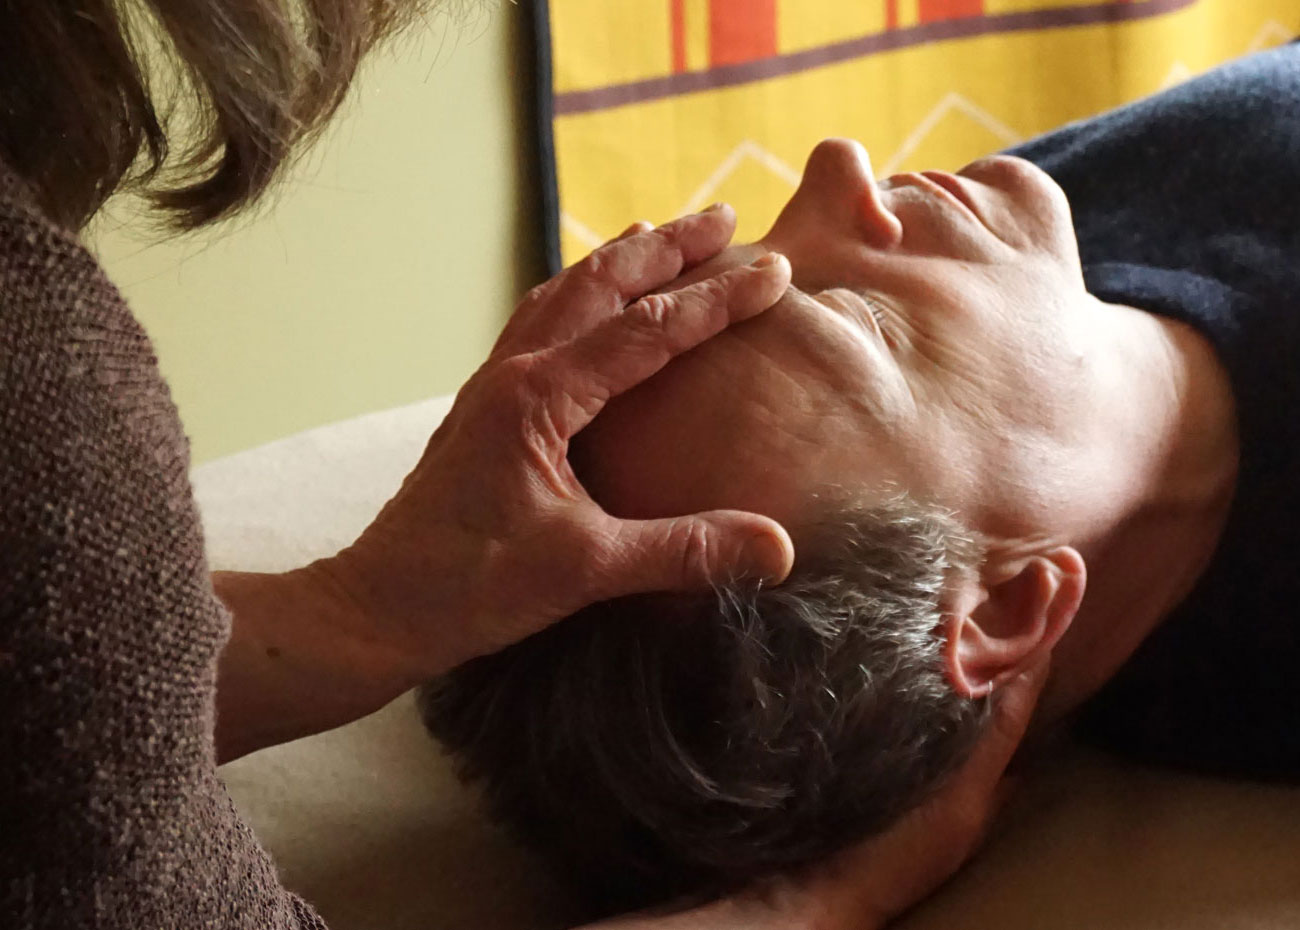 Cranial Sacral Therapy Seattle, craniosacral massage seattle, craniosacral therapists Seattle, cranial massage seattle, cranial therapy Seattle, cranial massage north Seattle, cranial massage near me, dr Cathy Englehart, doctor Cathy Englehart, roosevelt chiropractic